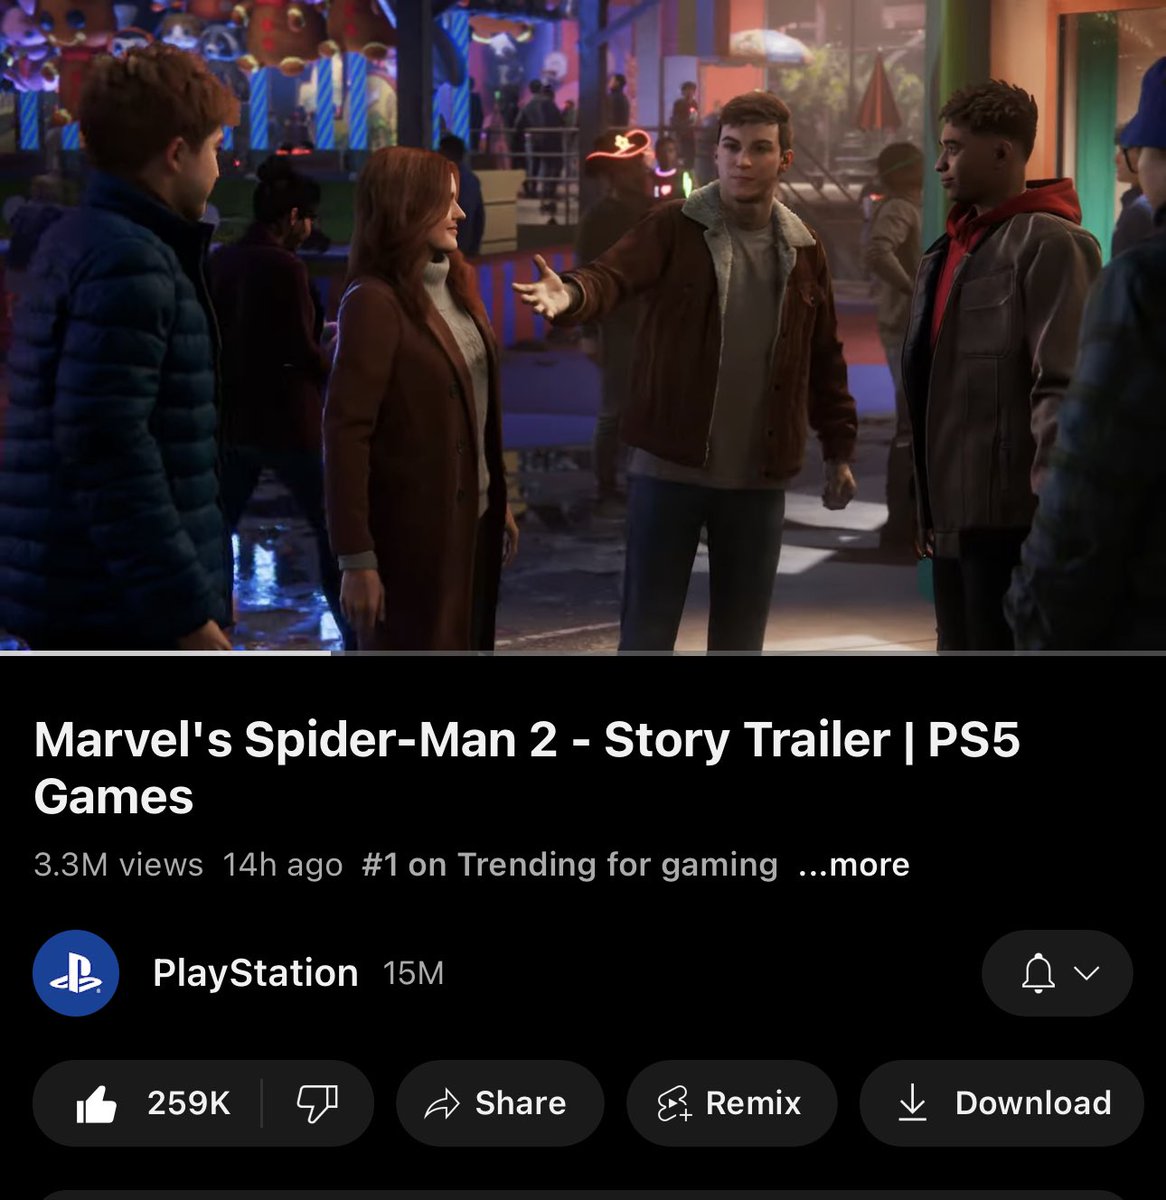 Marvel’s Spider-Man 2 Story Trailer is sitting at 3.3 million views in less than 24 hours 

THE HYPE IS REAL! #BeGreaterTogether #SpiderMan2 #SpiderManPS5 https://t.co/1YAVgXEenR